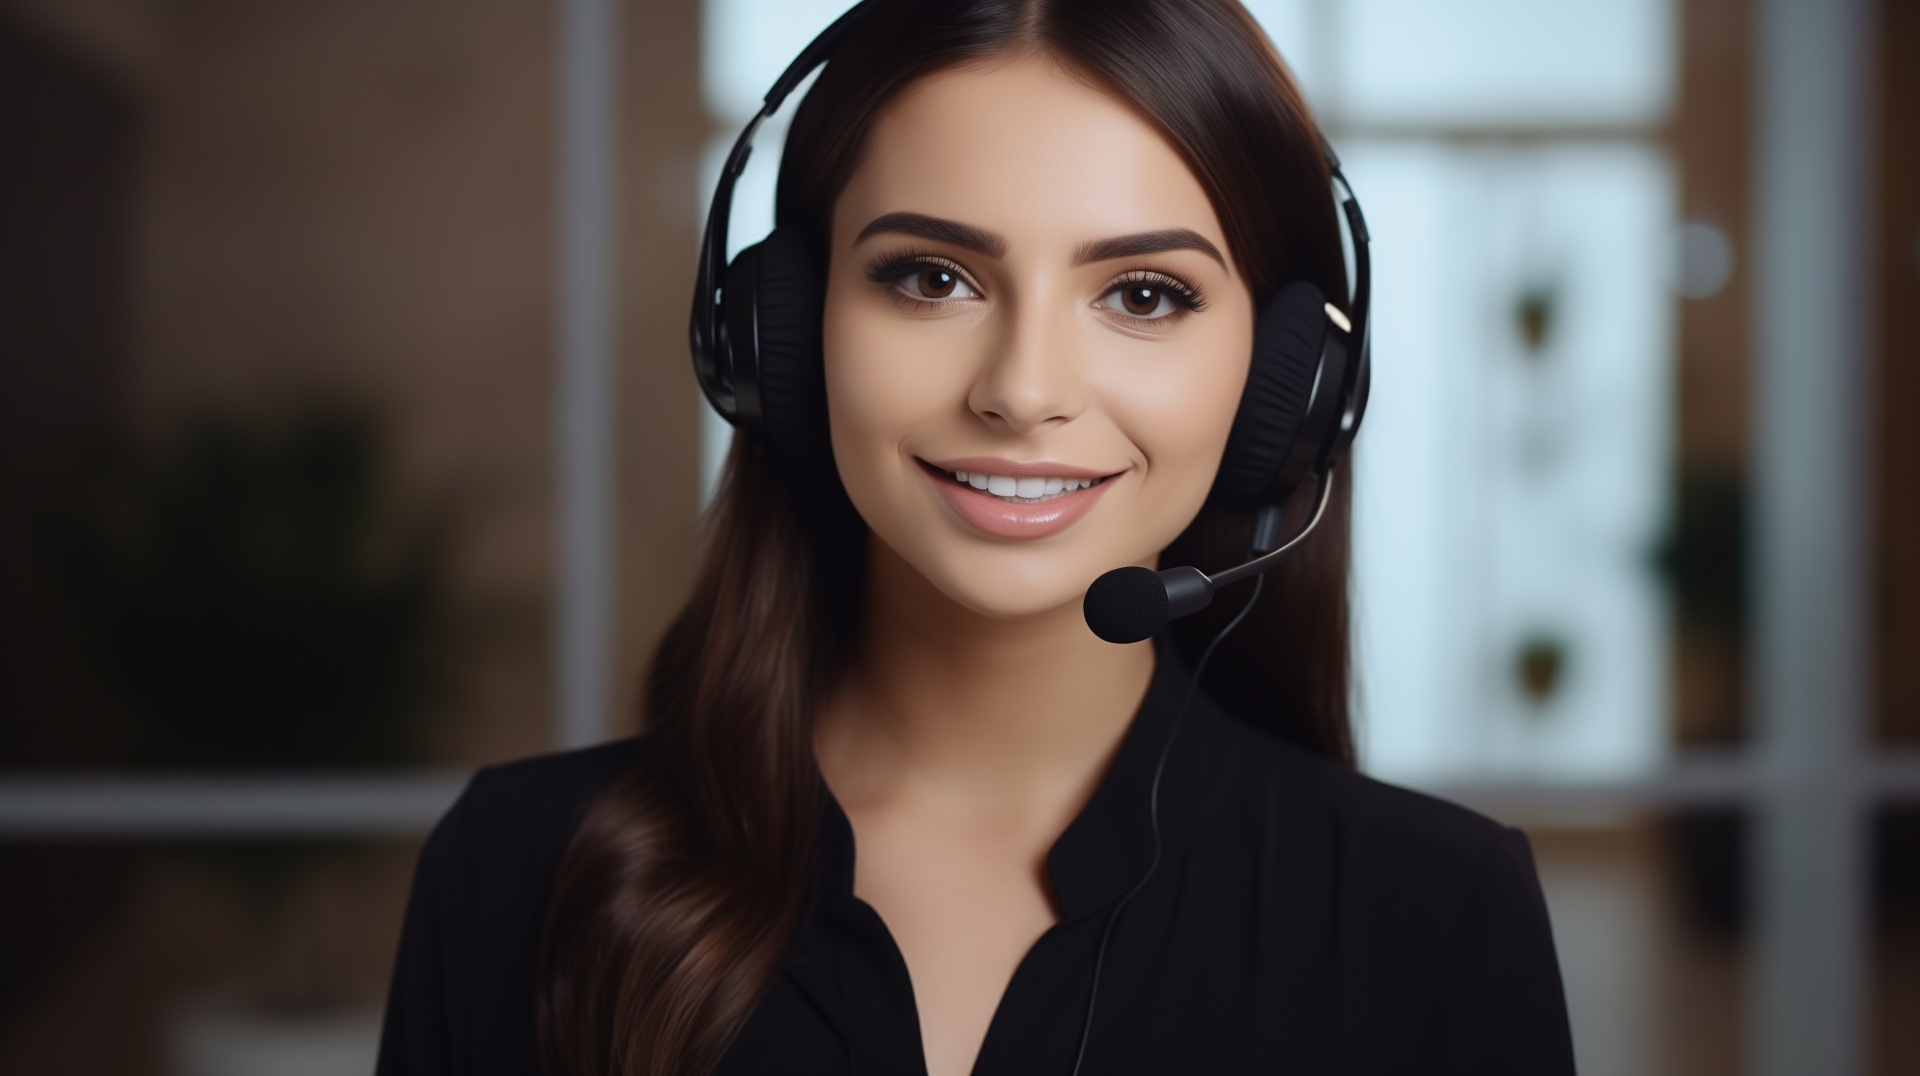 Call Center Operator Free Stock Photo - Public Domain Pictures